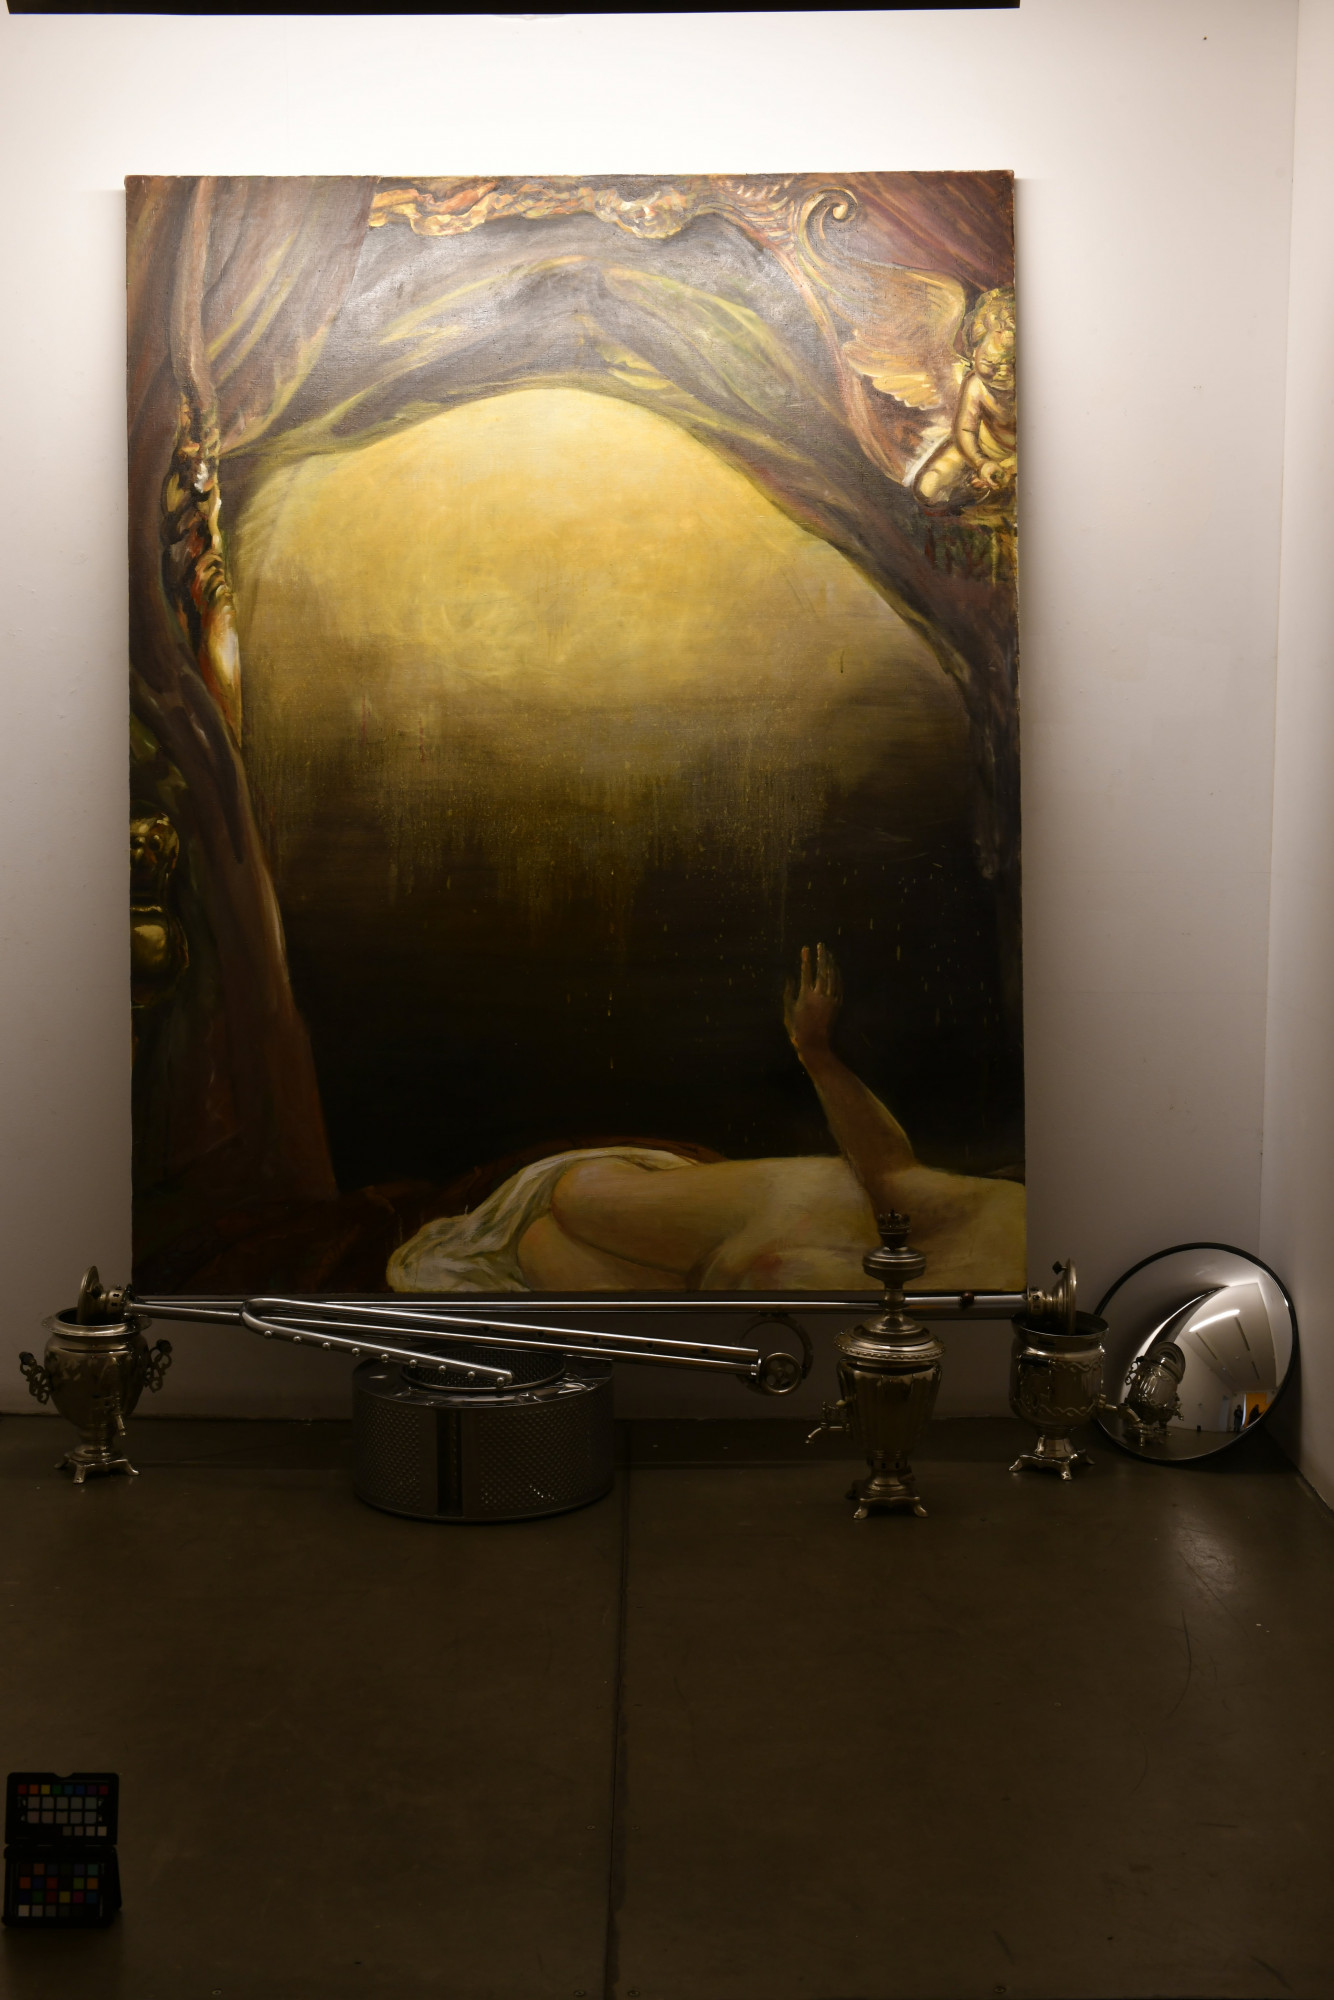 Golden Shower. From the Modeling series, 2015-2019. Tereshko explored the roles of painter and model and the notion of male gaze through reinterpreting famous classical paintings—in this case, Rembrandt’s Danaë